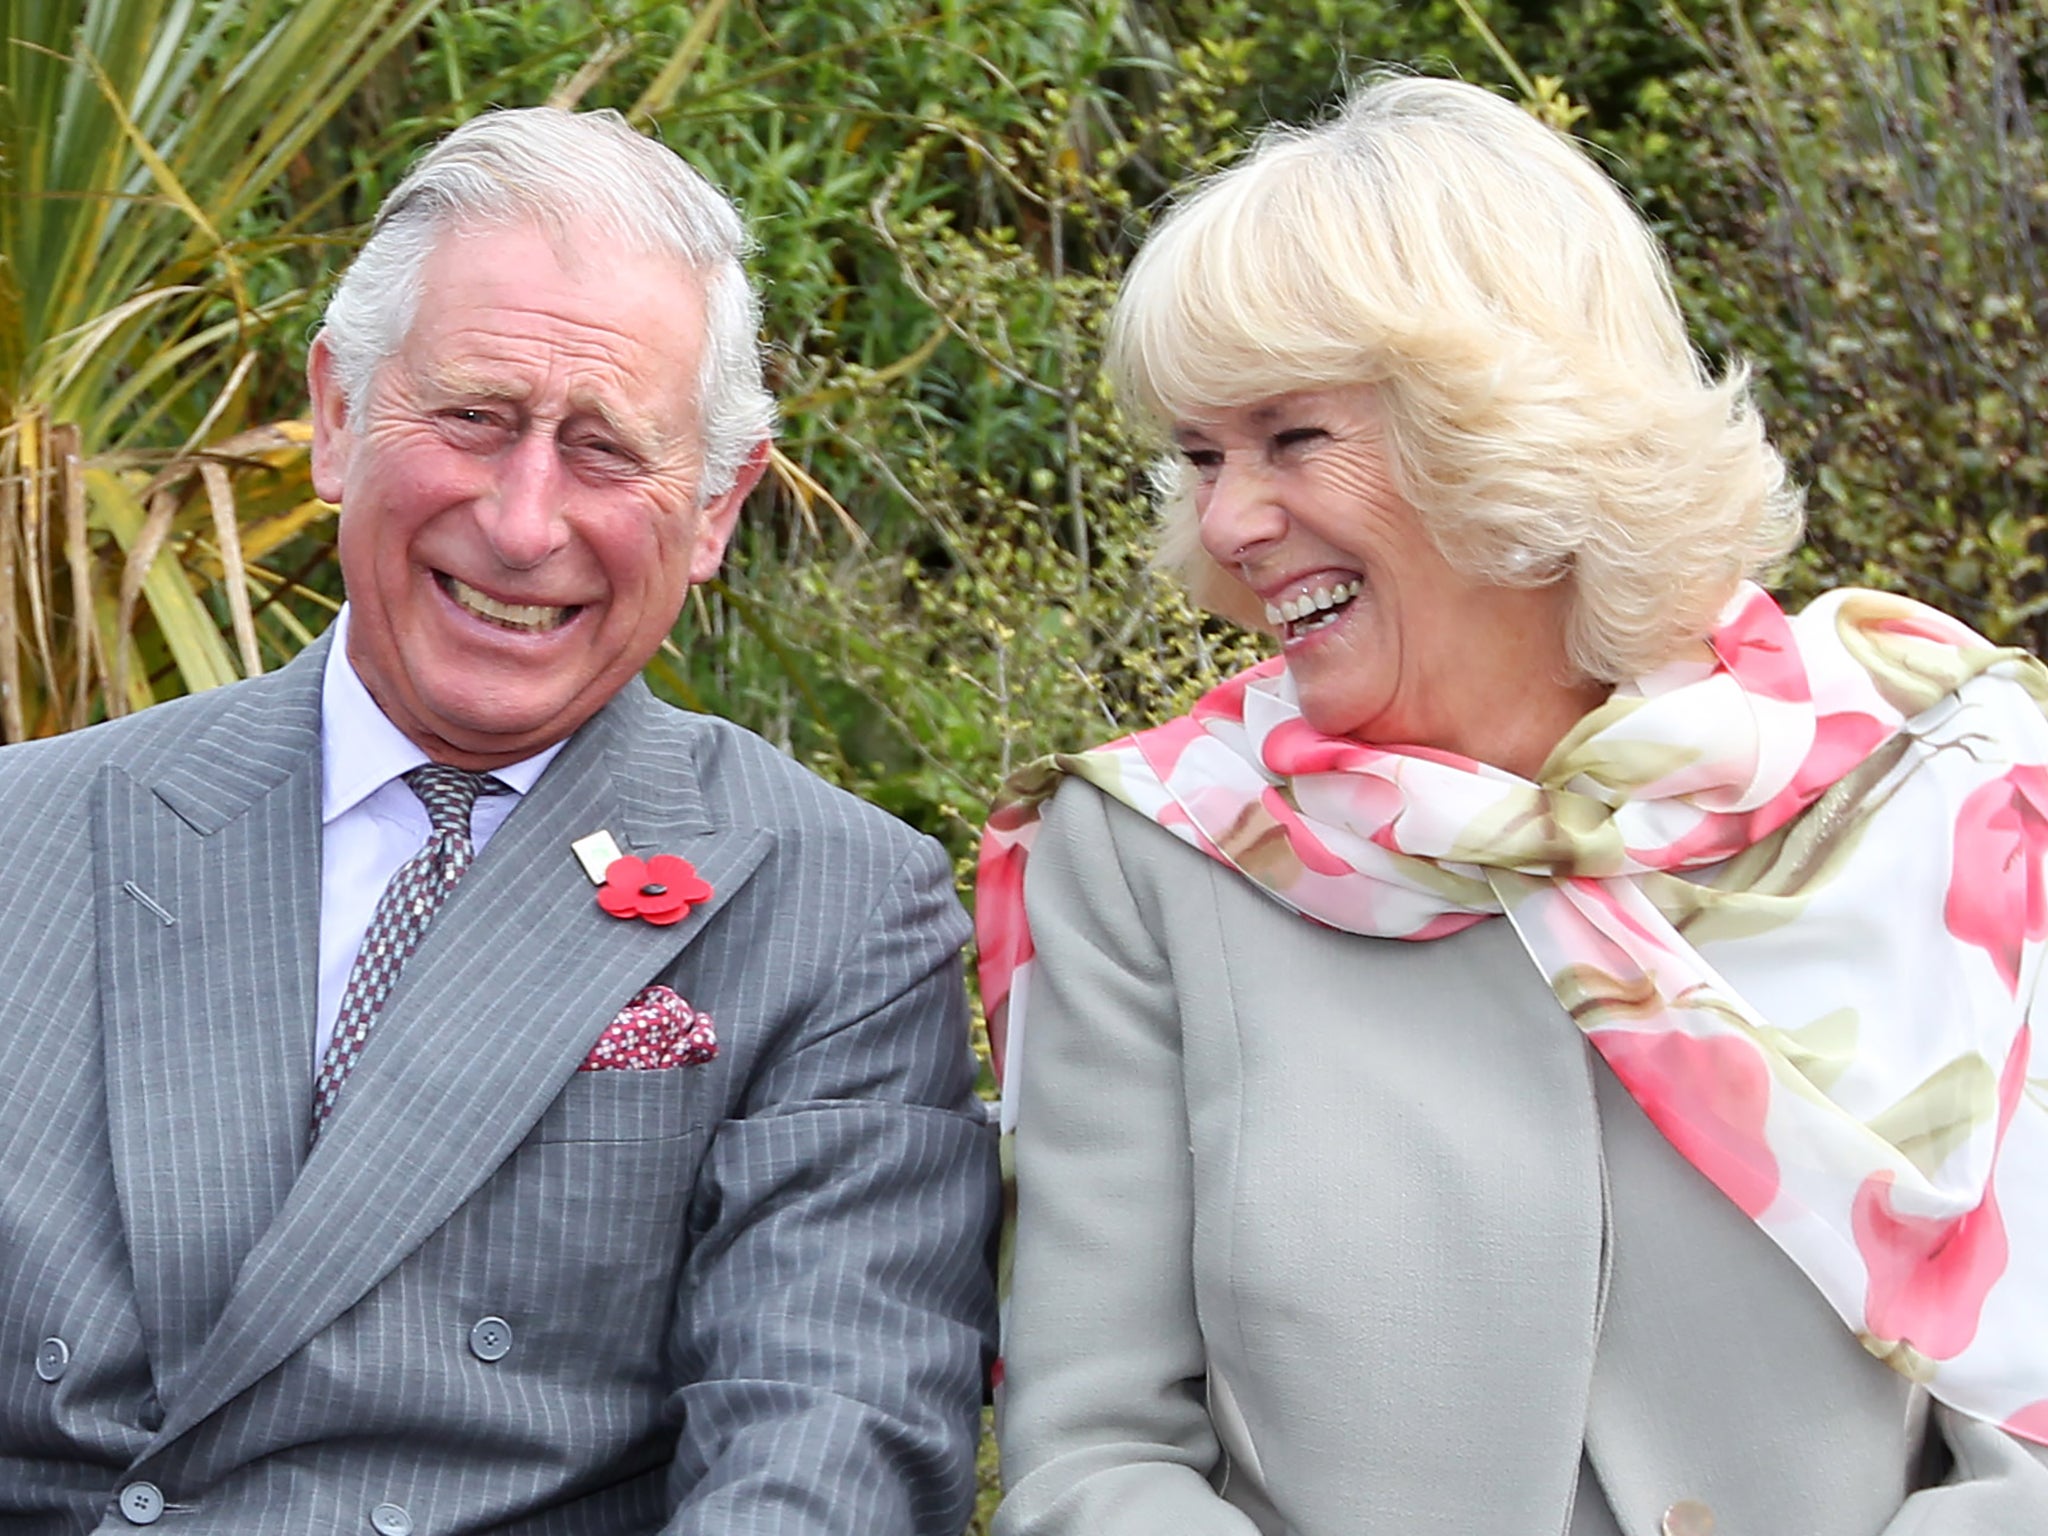 King Charles III and Camilla, Queen Consort, in 2015